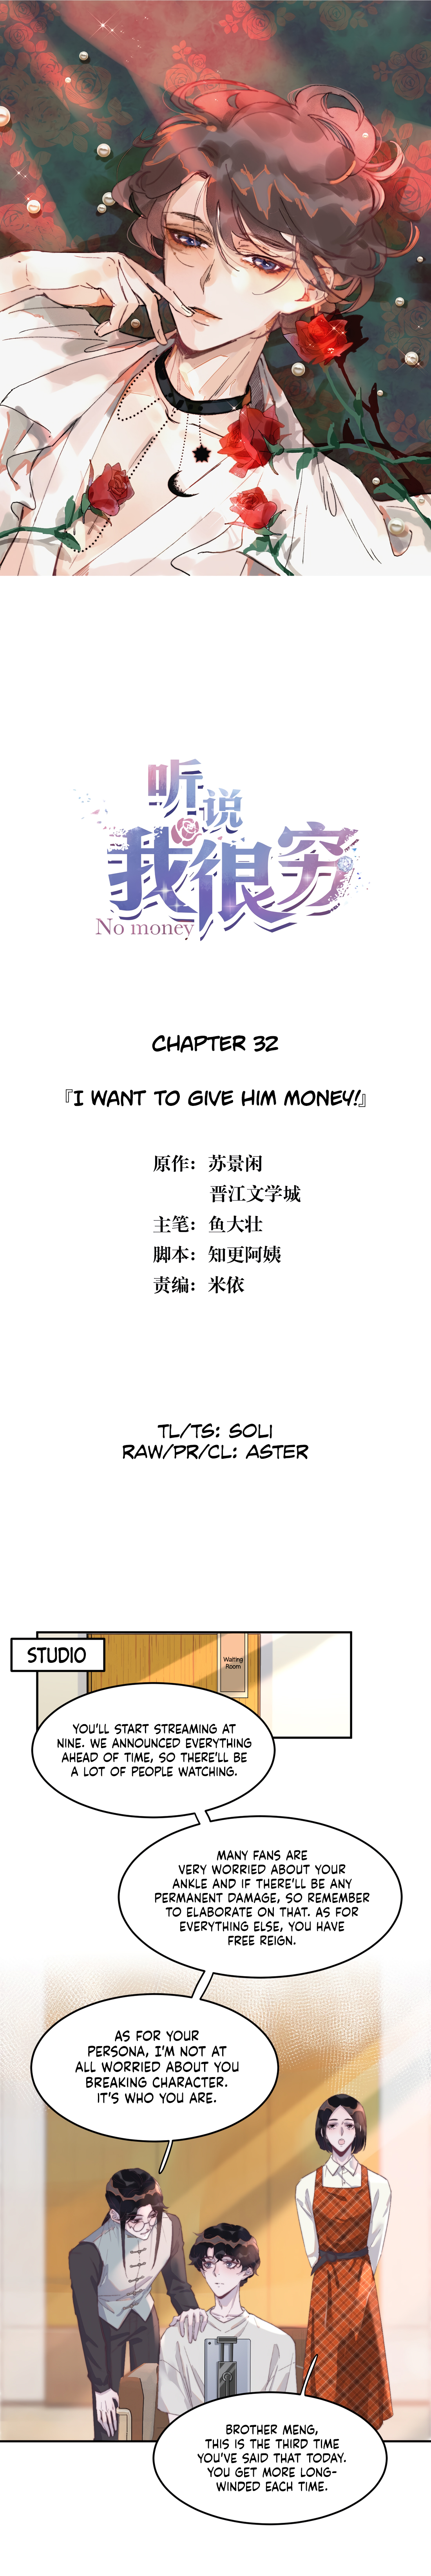 I Hear I'm Poor Ch. 32 I Want to Give Him Money!